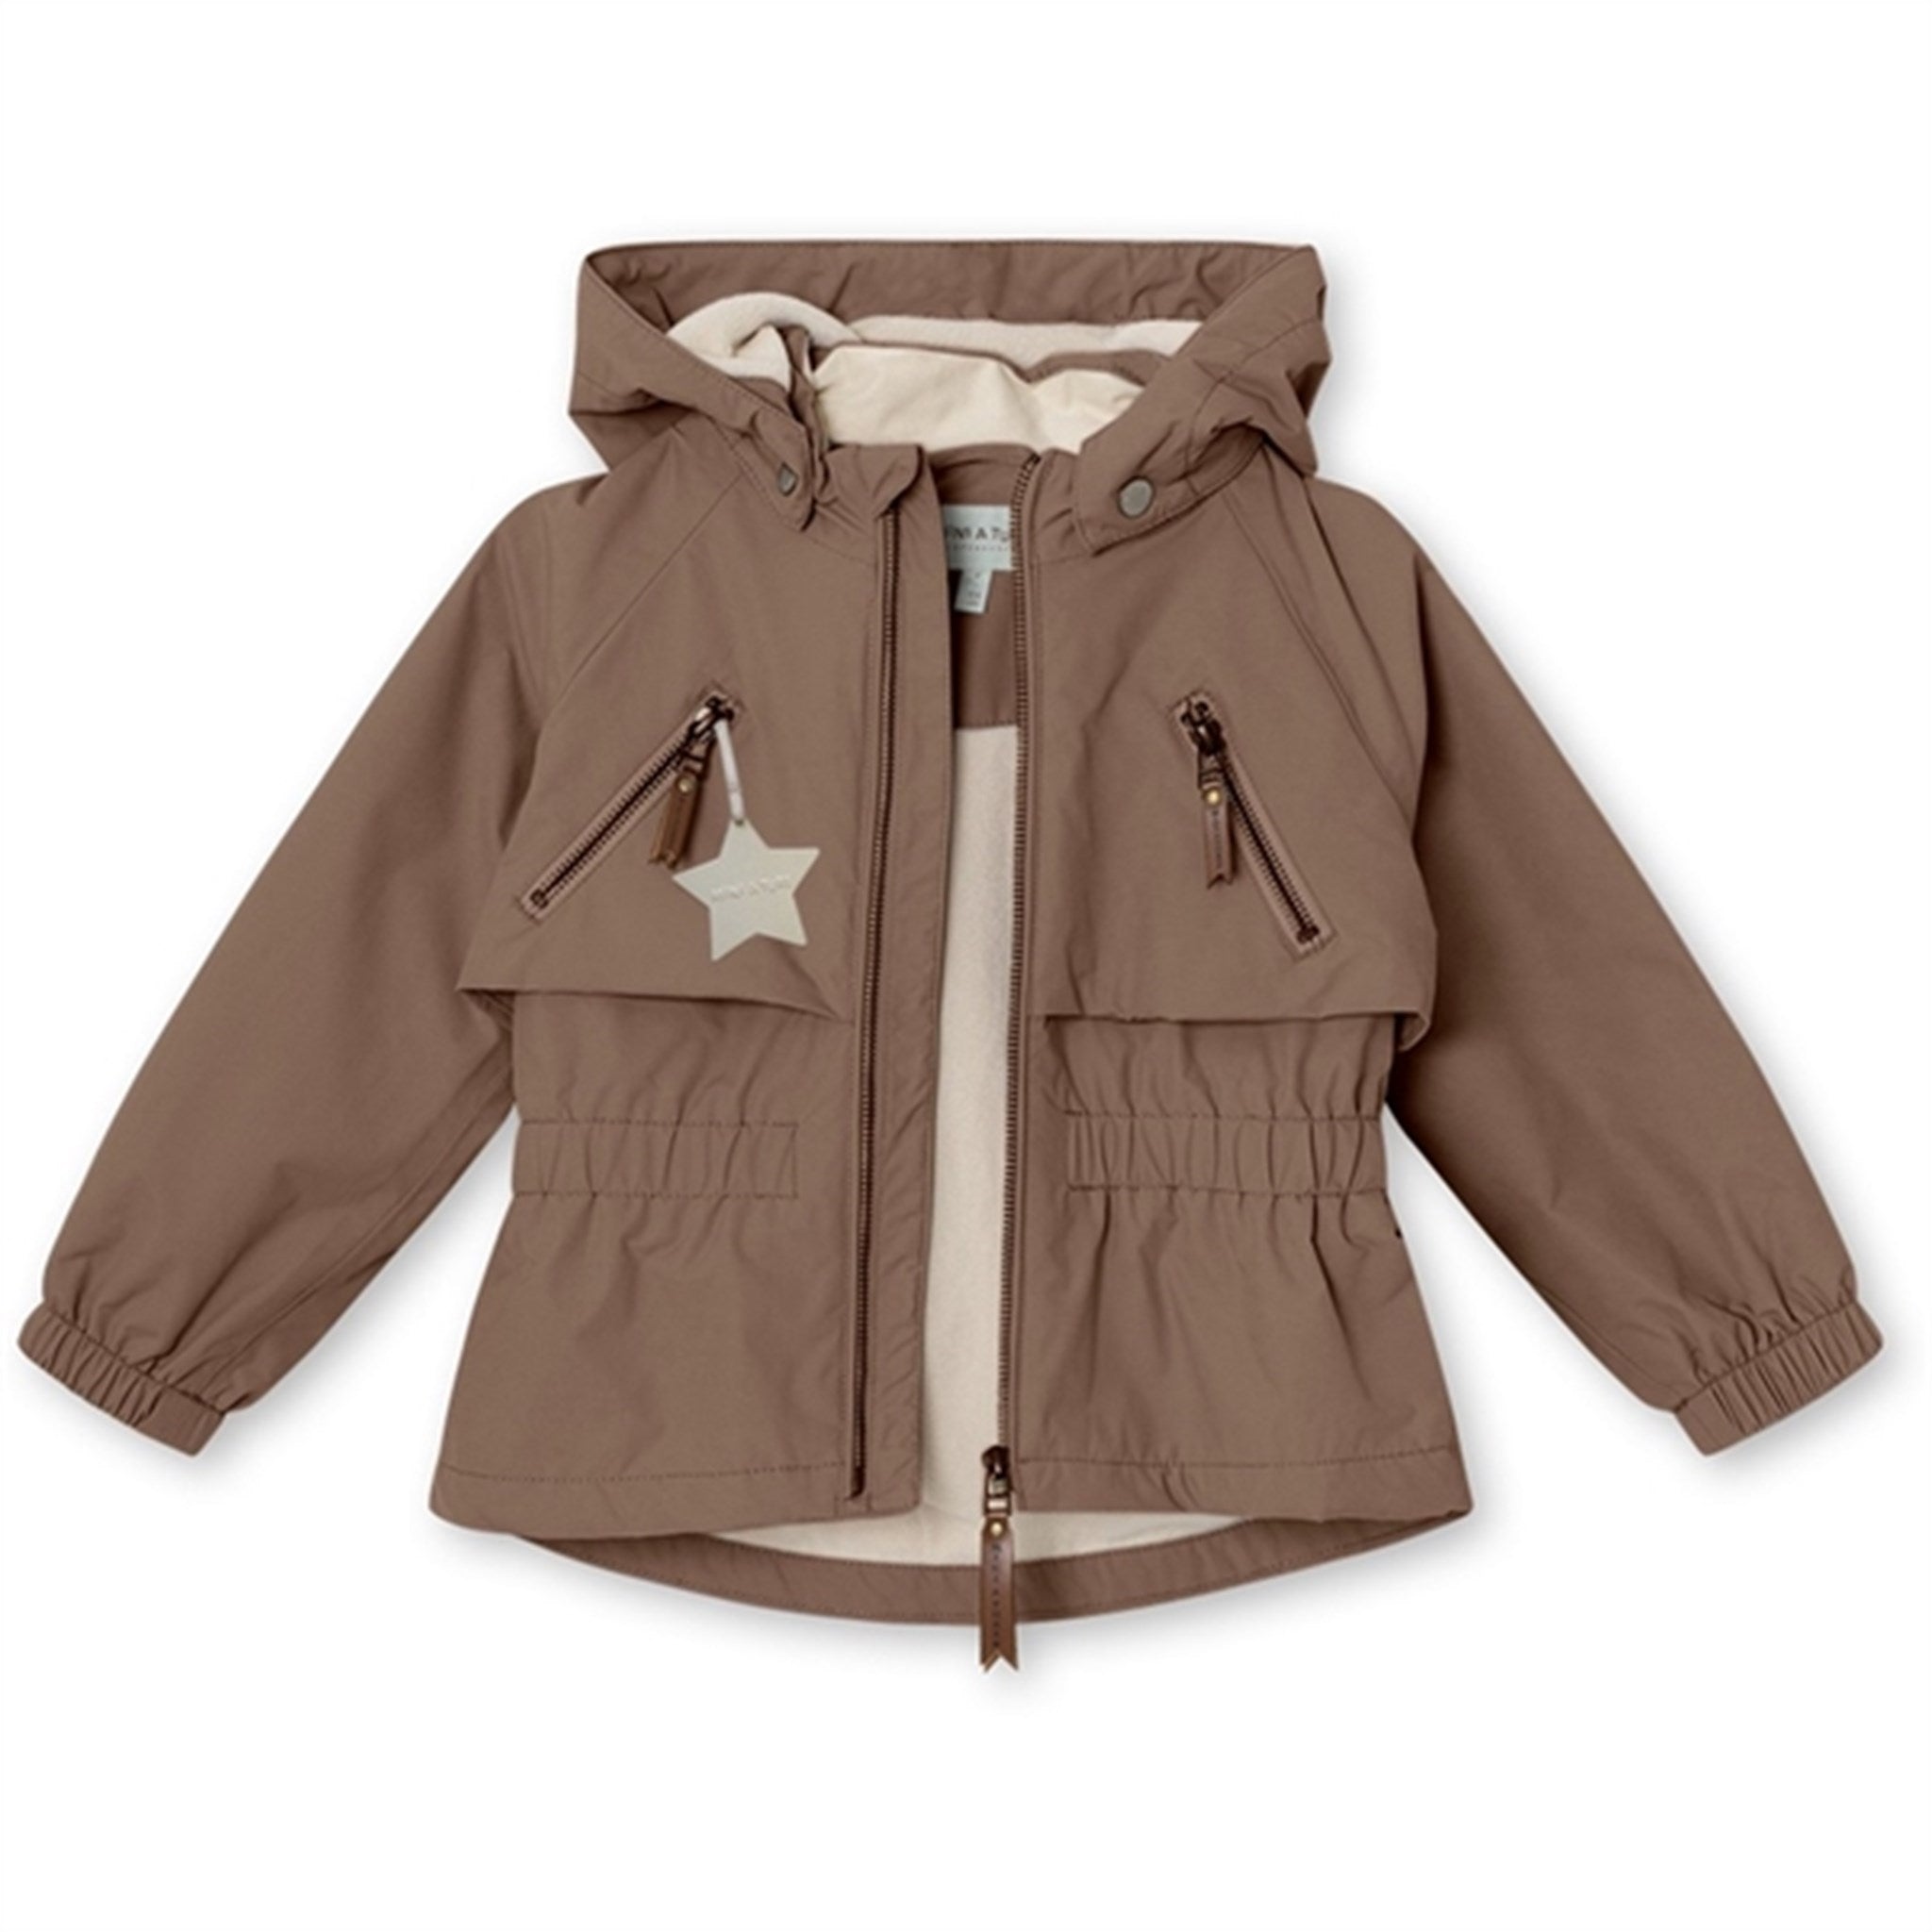 MINI A TURE Algea Spring Jacket With Fleece Lining Brownie 2